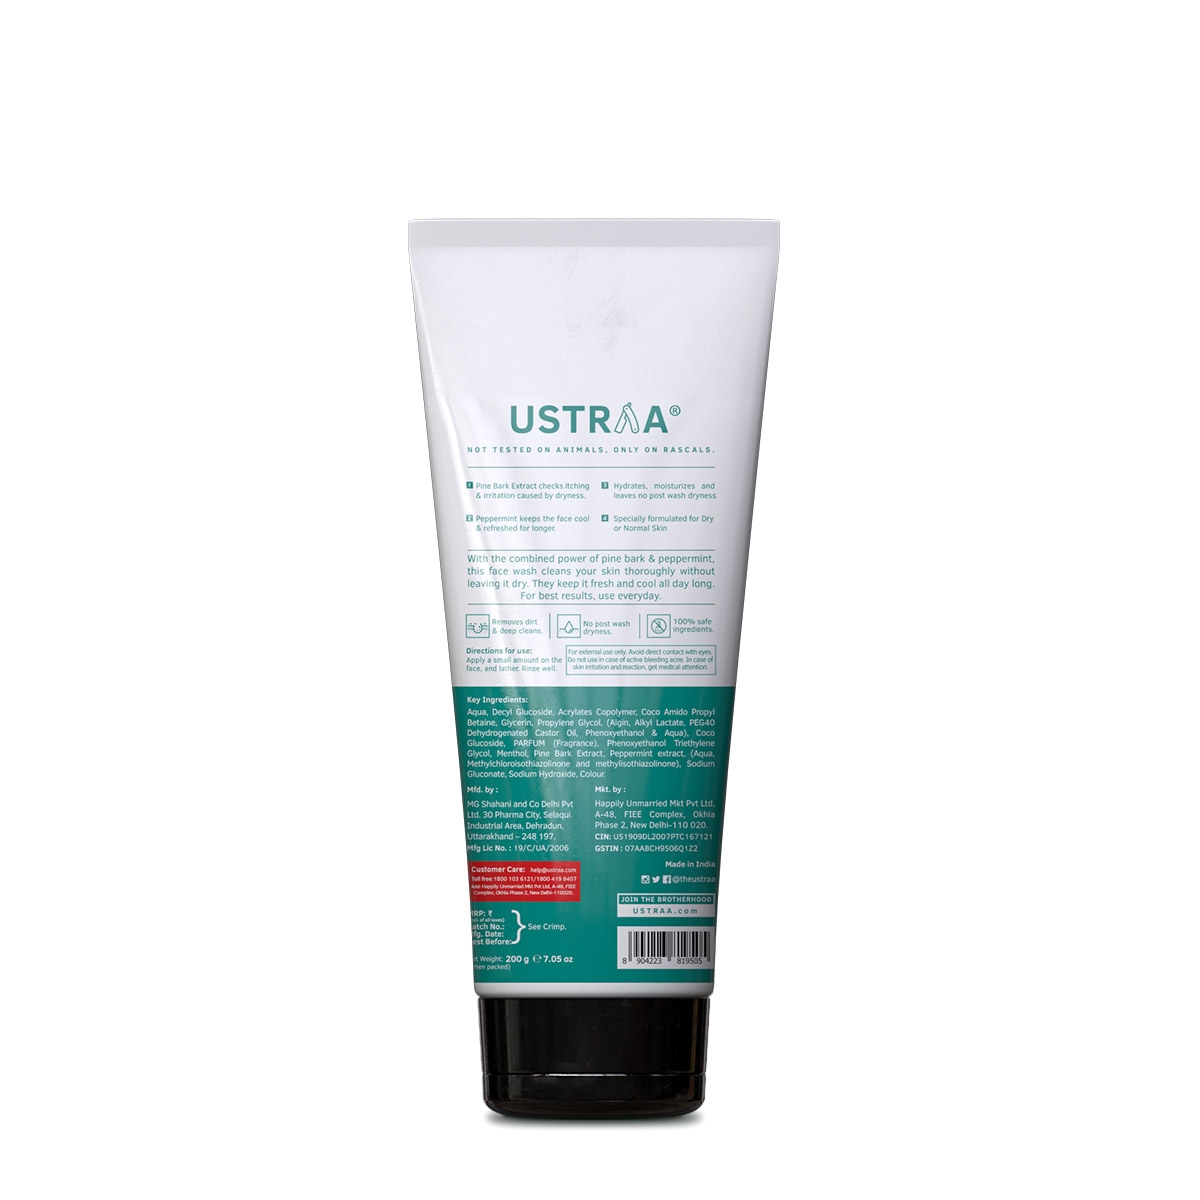 Ustraa | Ustraa Night Cream - 50g - De-Tan And Anti-Aging & Face Wash For Dry Skin-200g 6